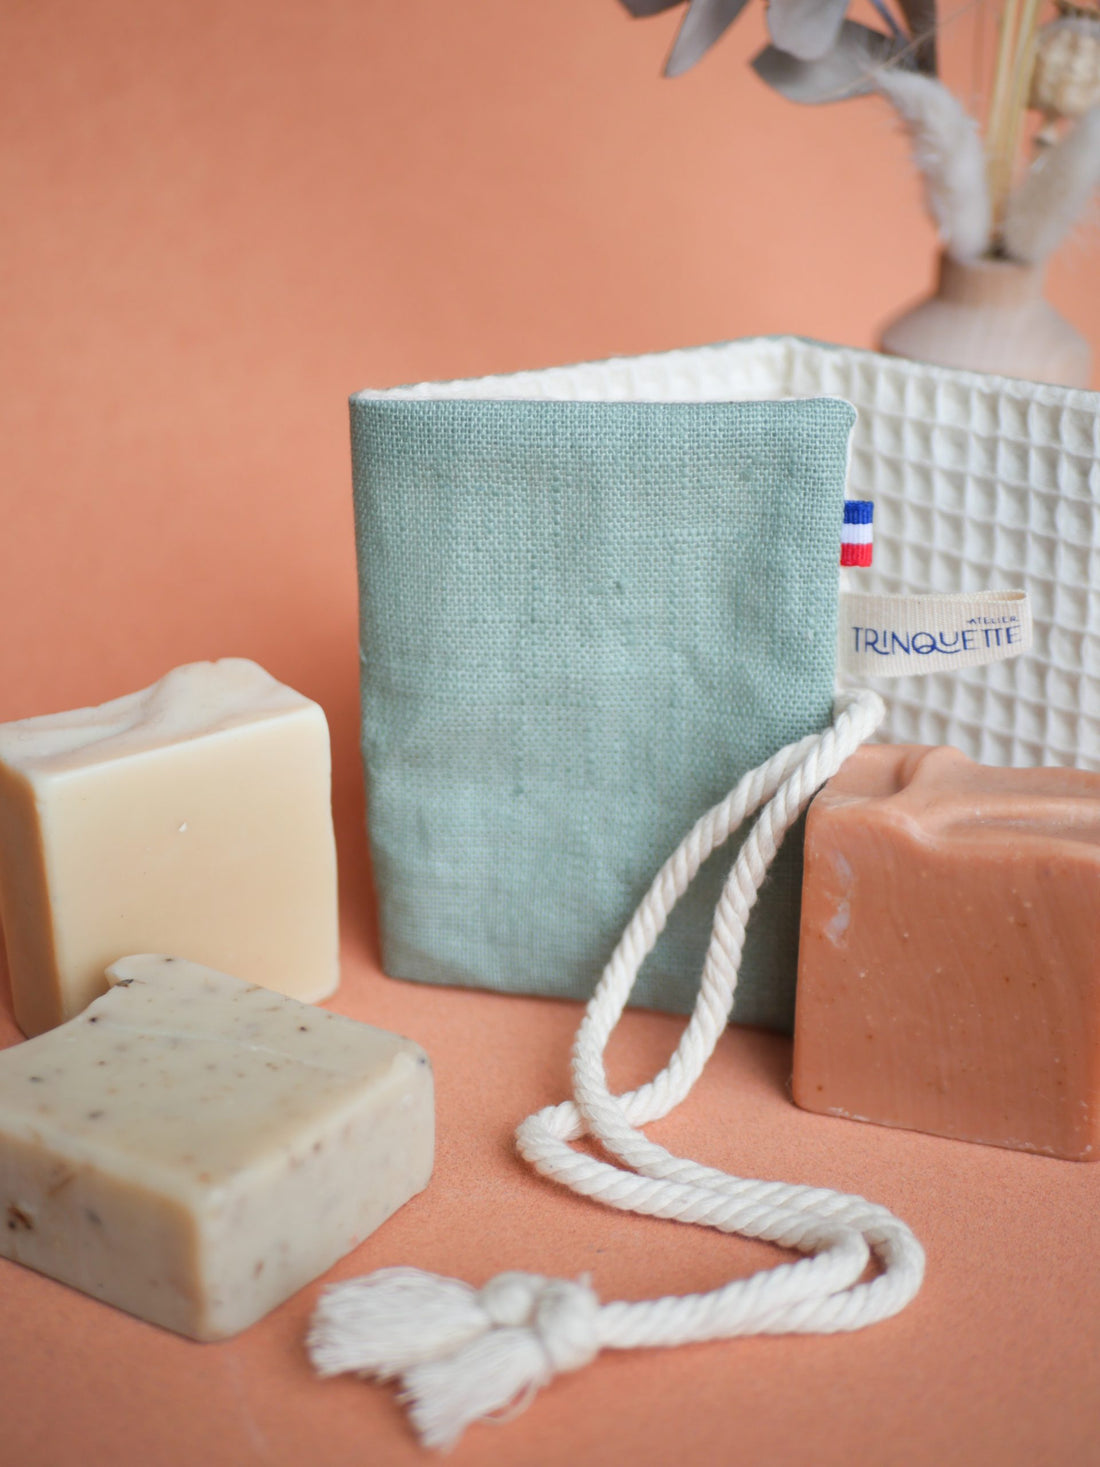 Coated linen soap pouch